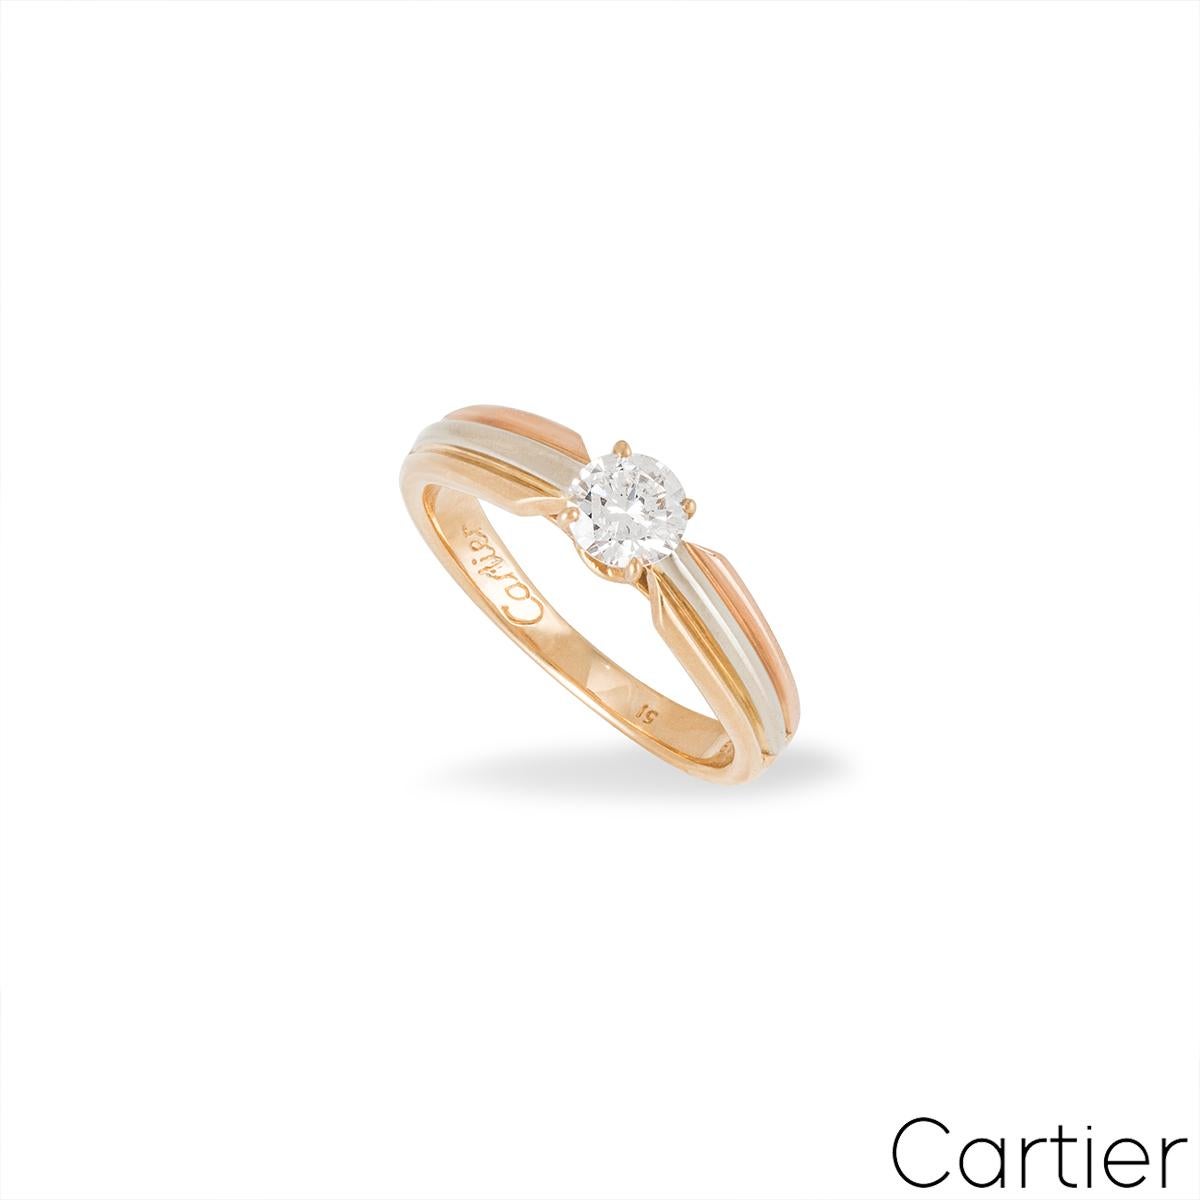 An 18k tri-colour gold diamond ring from the Trinity de Cartier collection. The ring is set to the centre with a 0.32ct round brilliant cut diamond, D colour and VVS2 in clarity. The diamond is set within a classic 4 claw setting with the band